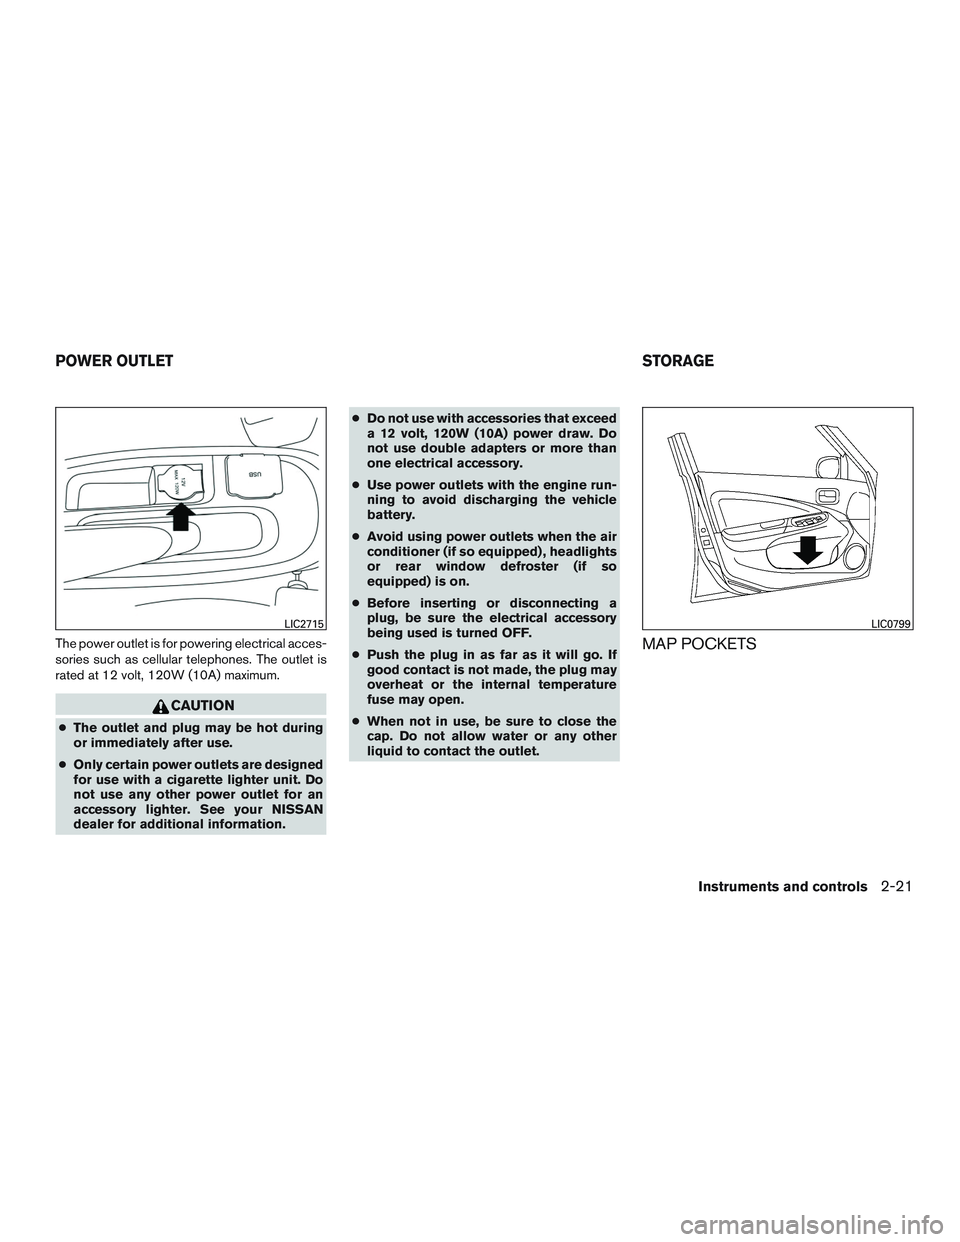 NISSAN MICRA 2015  Owner´s Manual The power outlet is for powering electrical acces-
sories such as cellular telephones. The outlet is
rated at 12 volt, 120W (10A) maximum.
CAUTION
●The outlet and plug may be hot during
or immediate